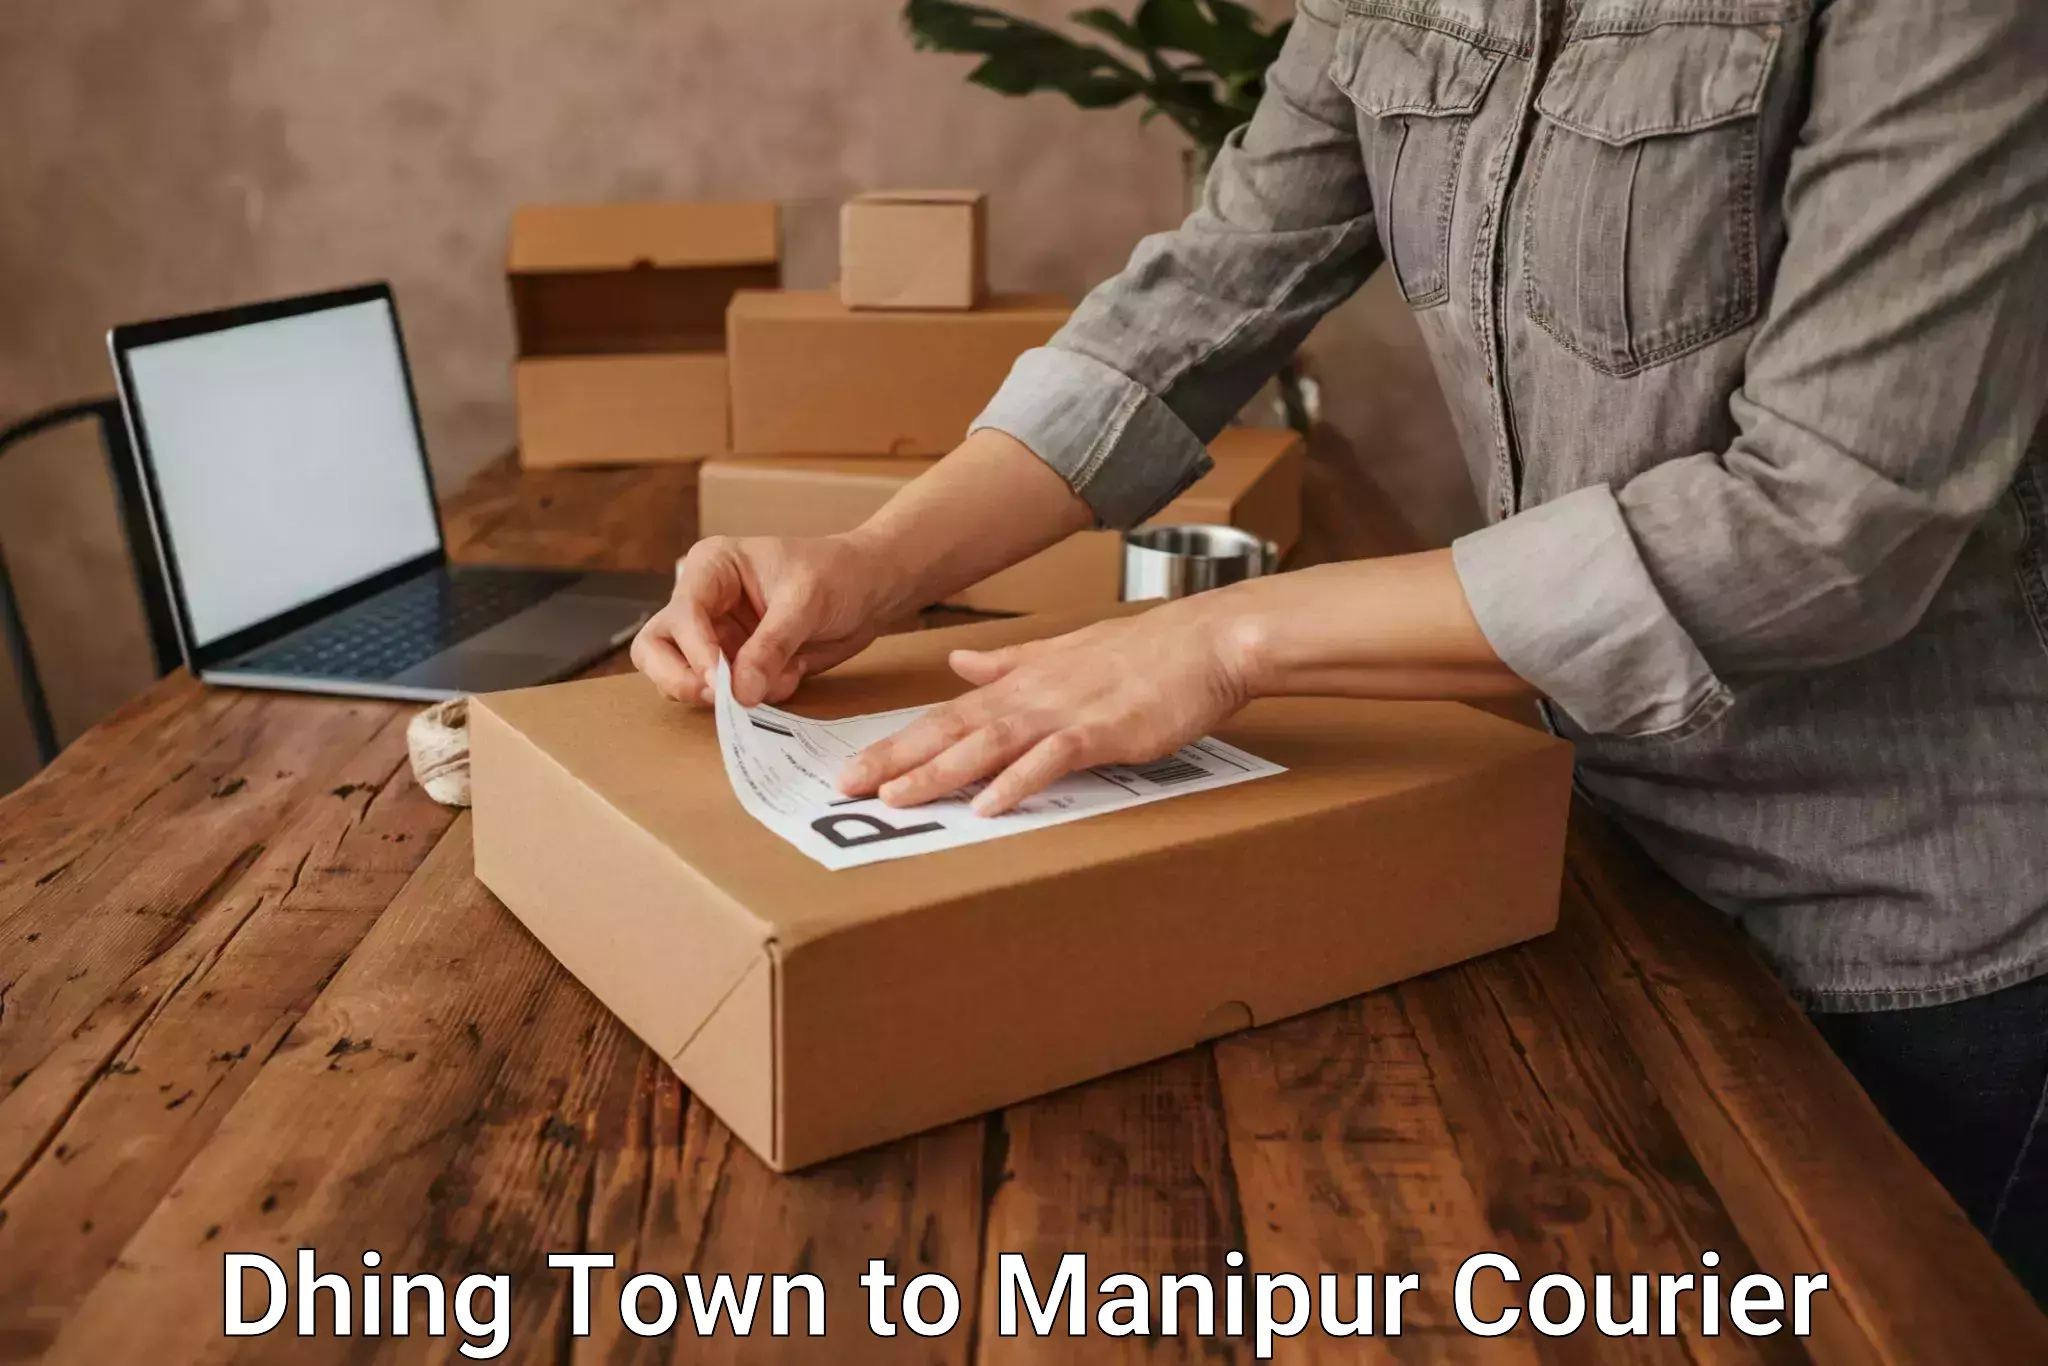 Parcel service for businesses Dhing Town to Manipur